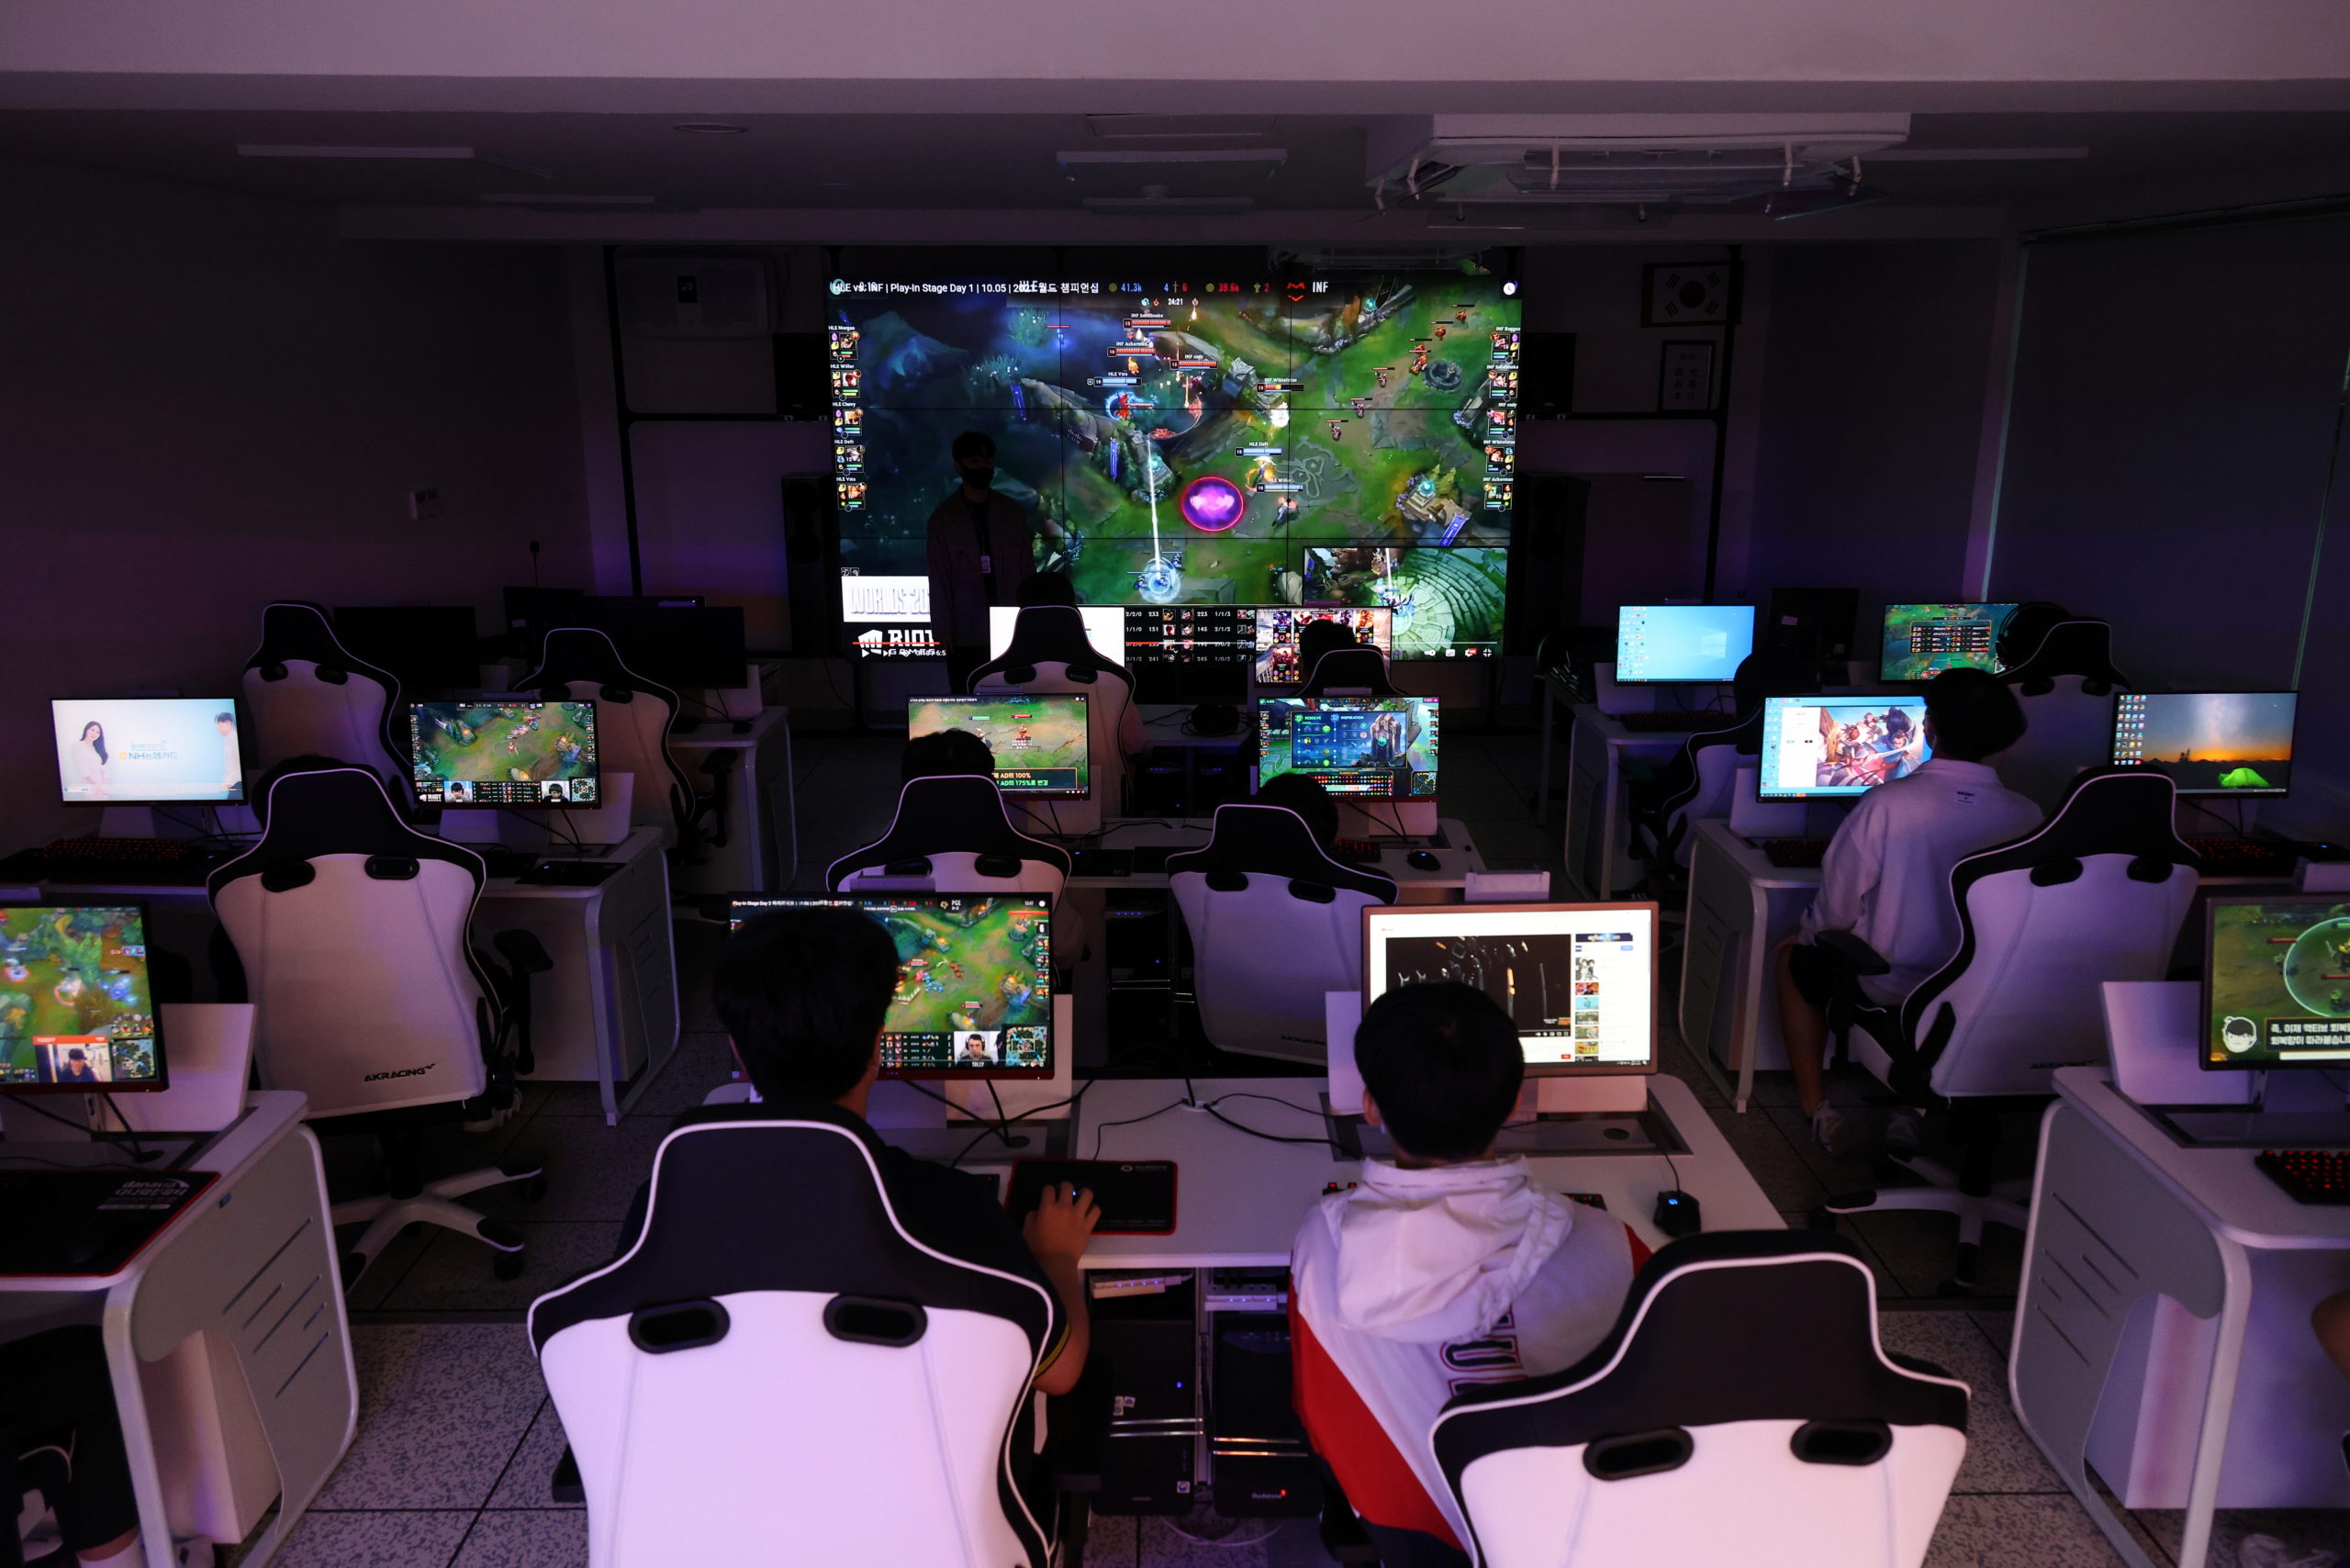 Students majoring in esports attend a class at Eunpyeong Meditech high school in Seoul, South Korea, October 7, 2021. Picture taken on October 7, 2021. 